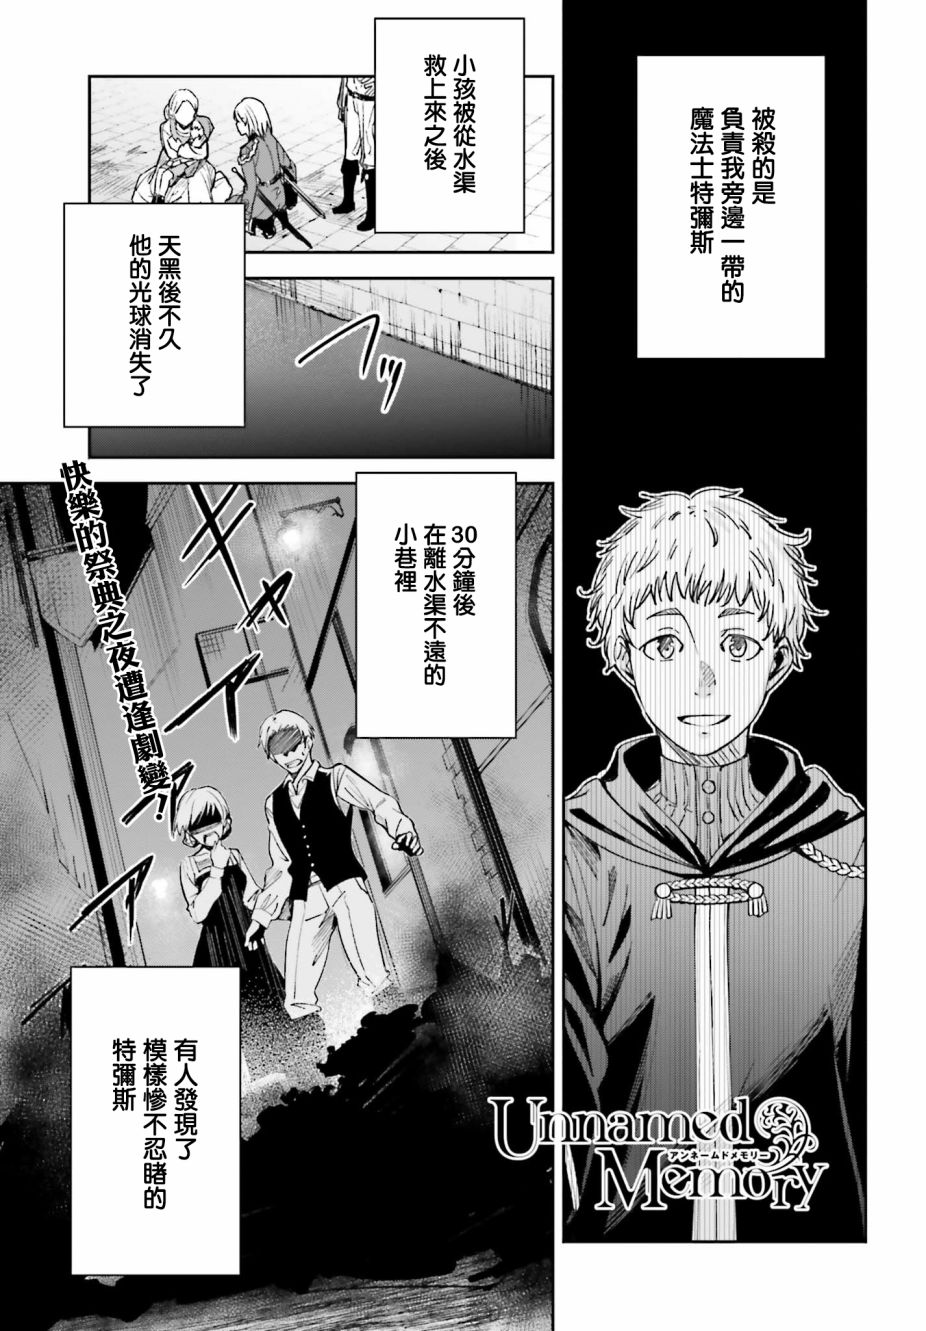 Unnamed Memory - 第04话 - 1